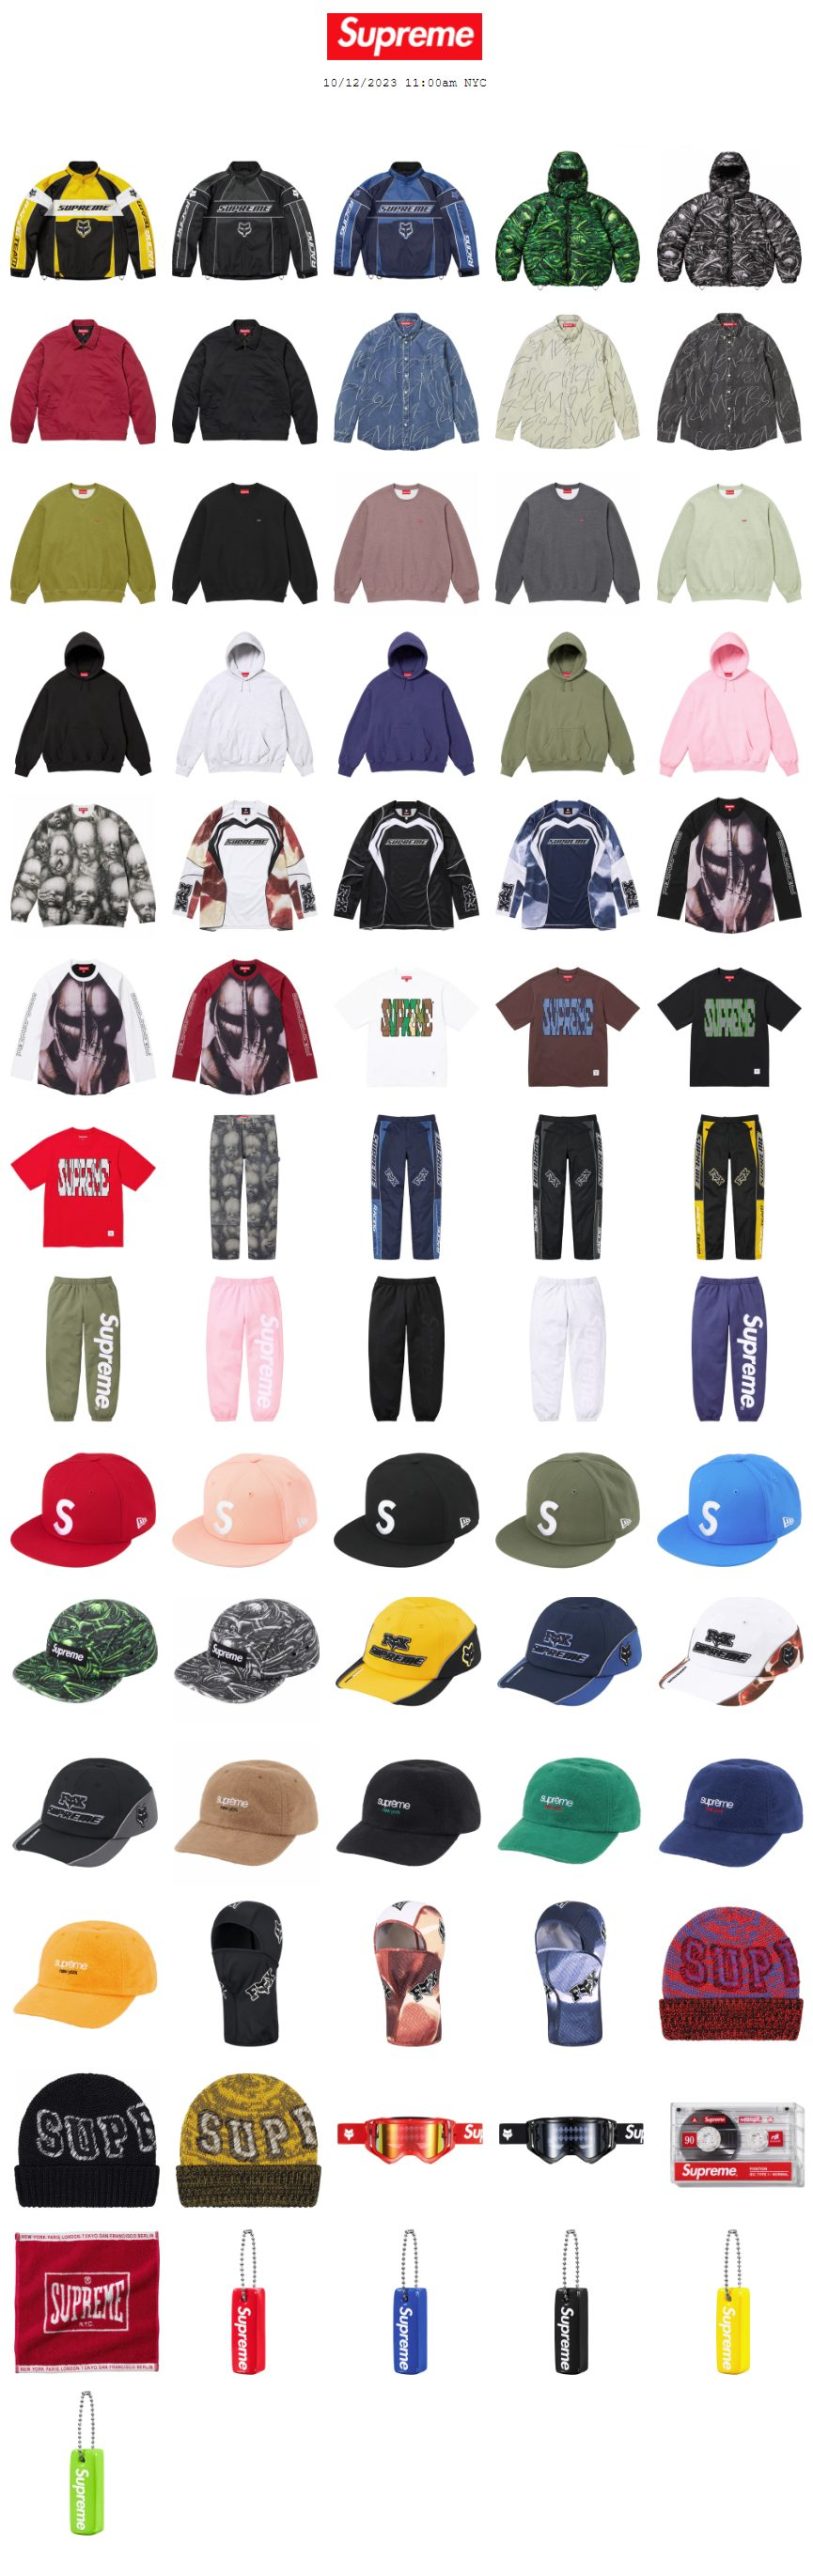 Supreme 公式通販サイトで10月14日 Week8に発売予定の23FW 23AW 新作